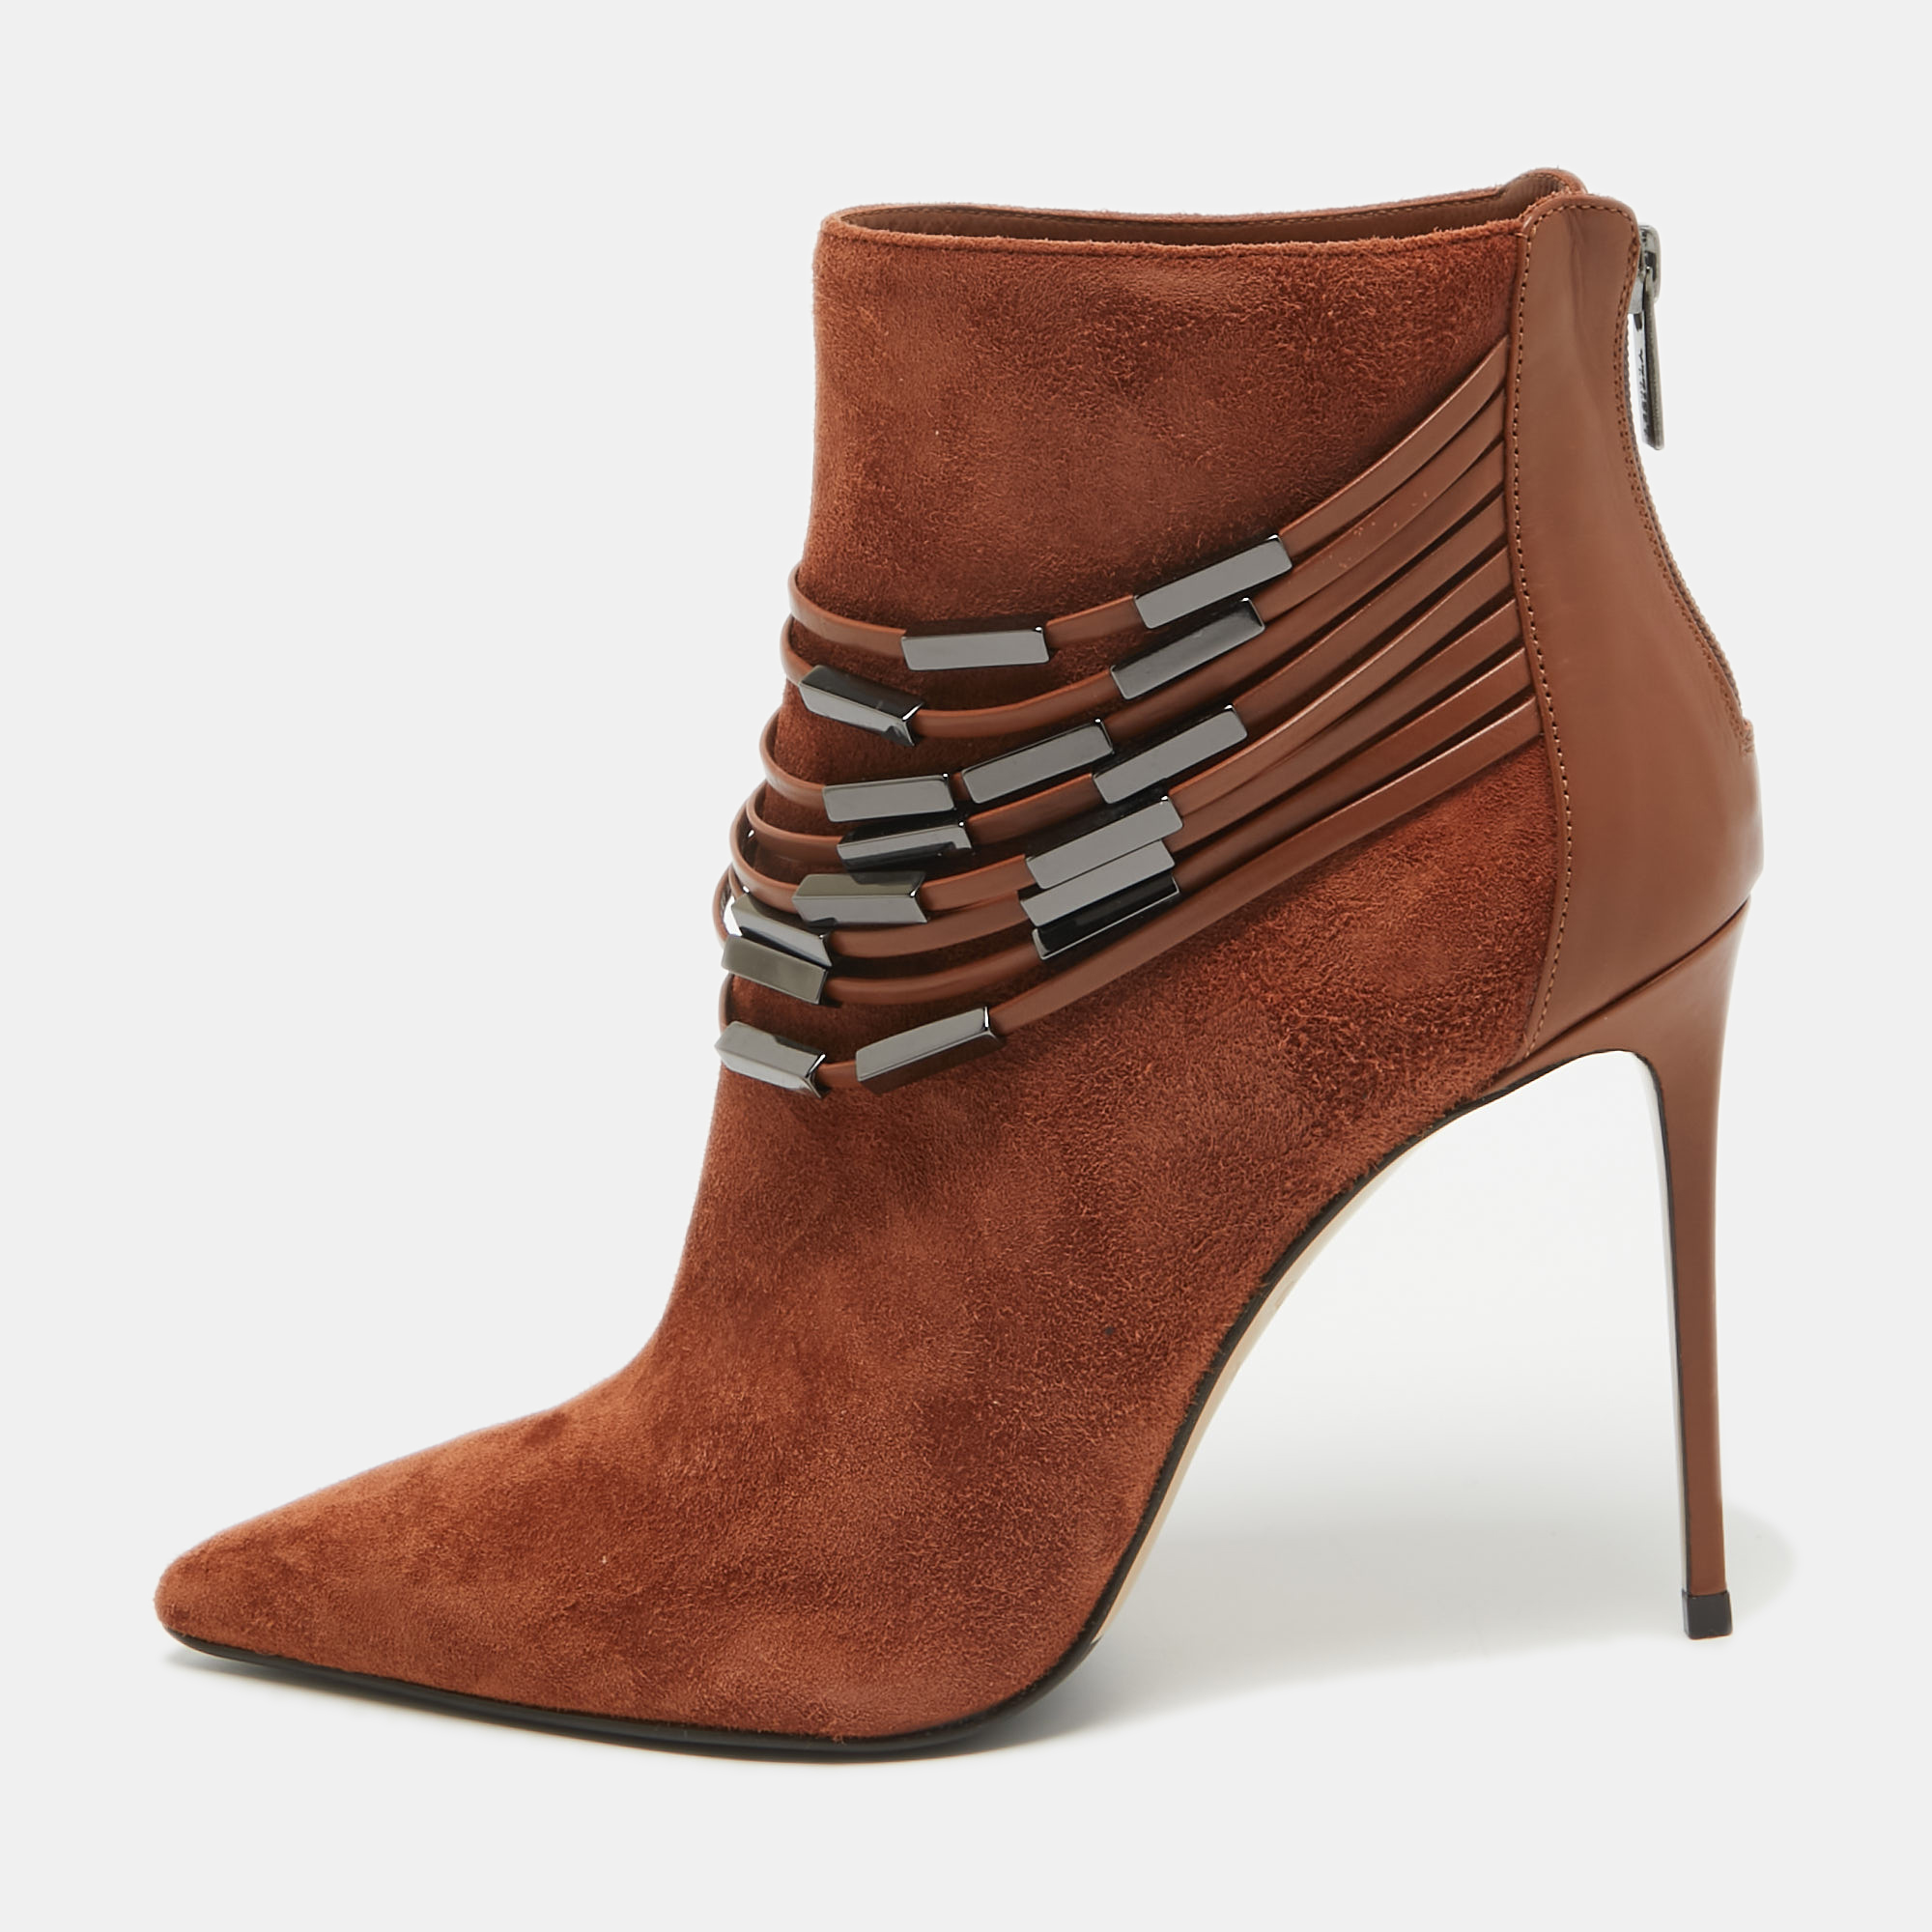 

Le Silla Brown Suede Embellished Pointed Toe Ankle Booties Size